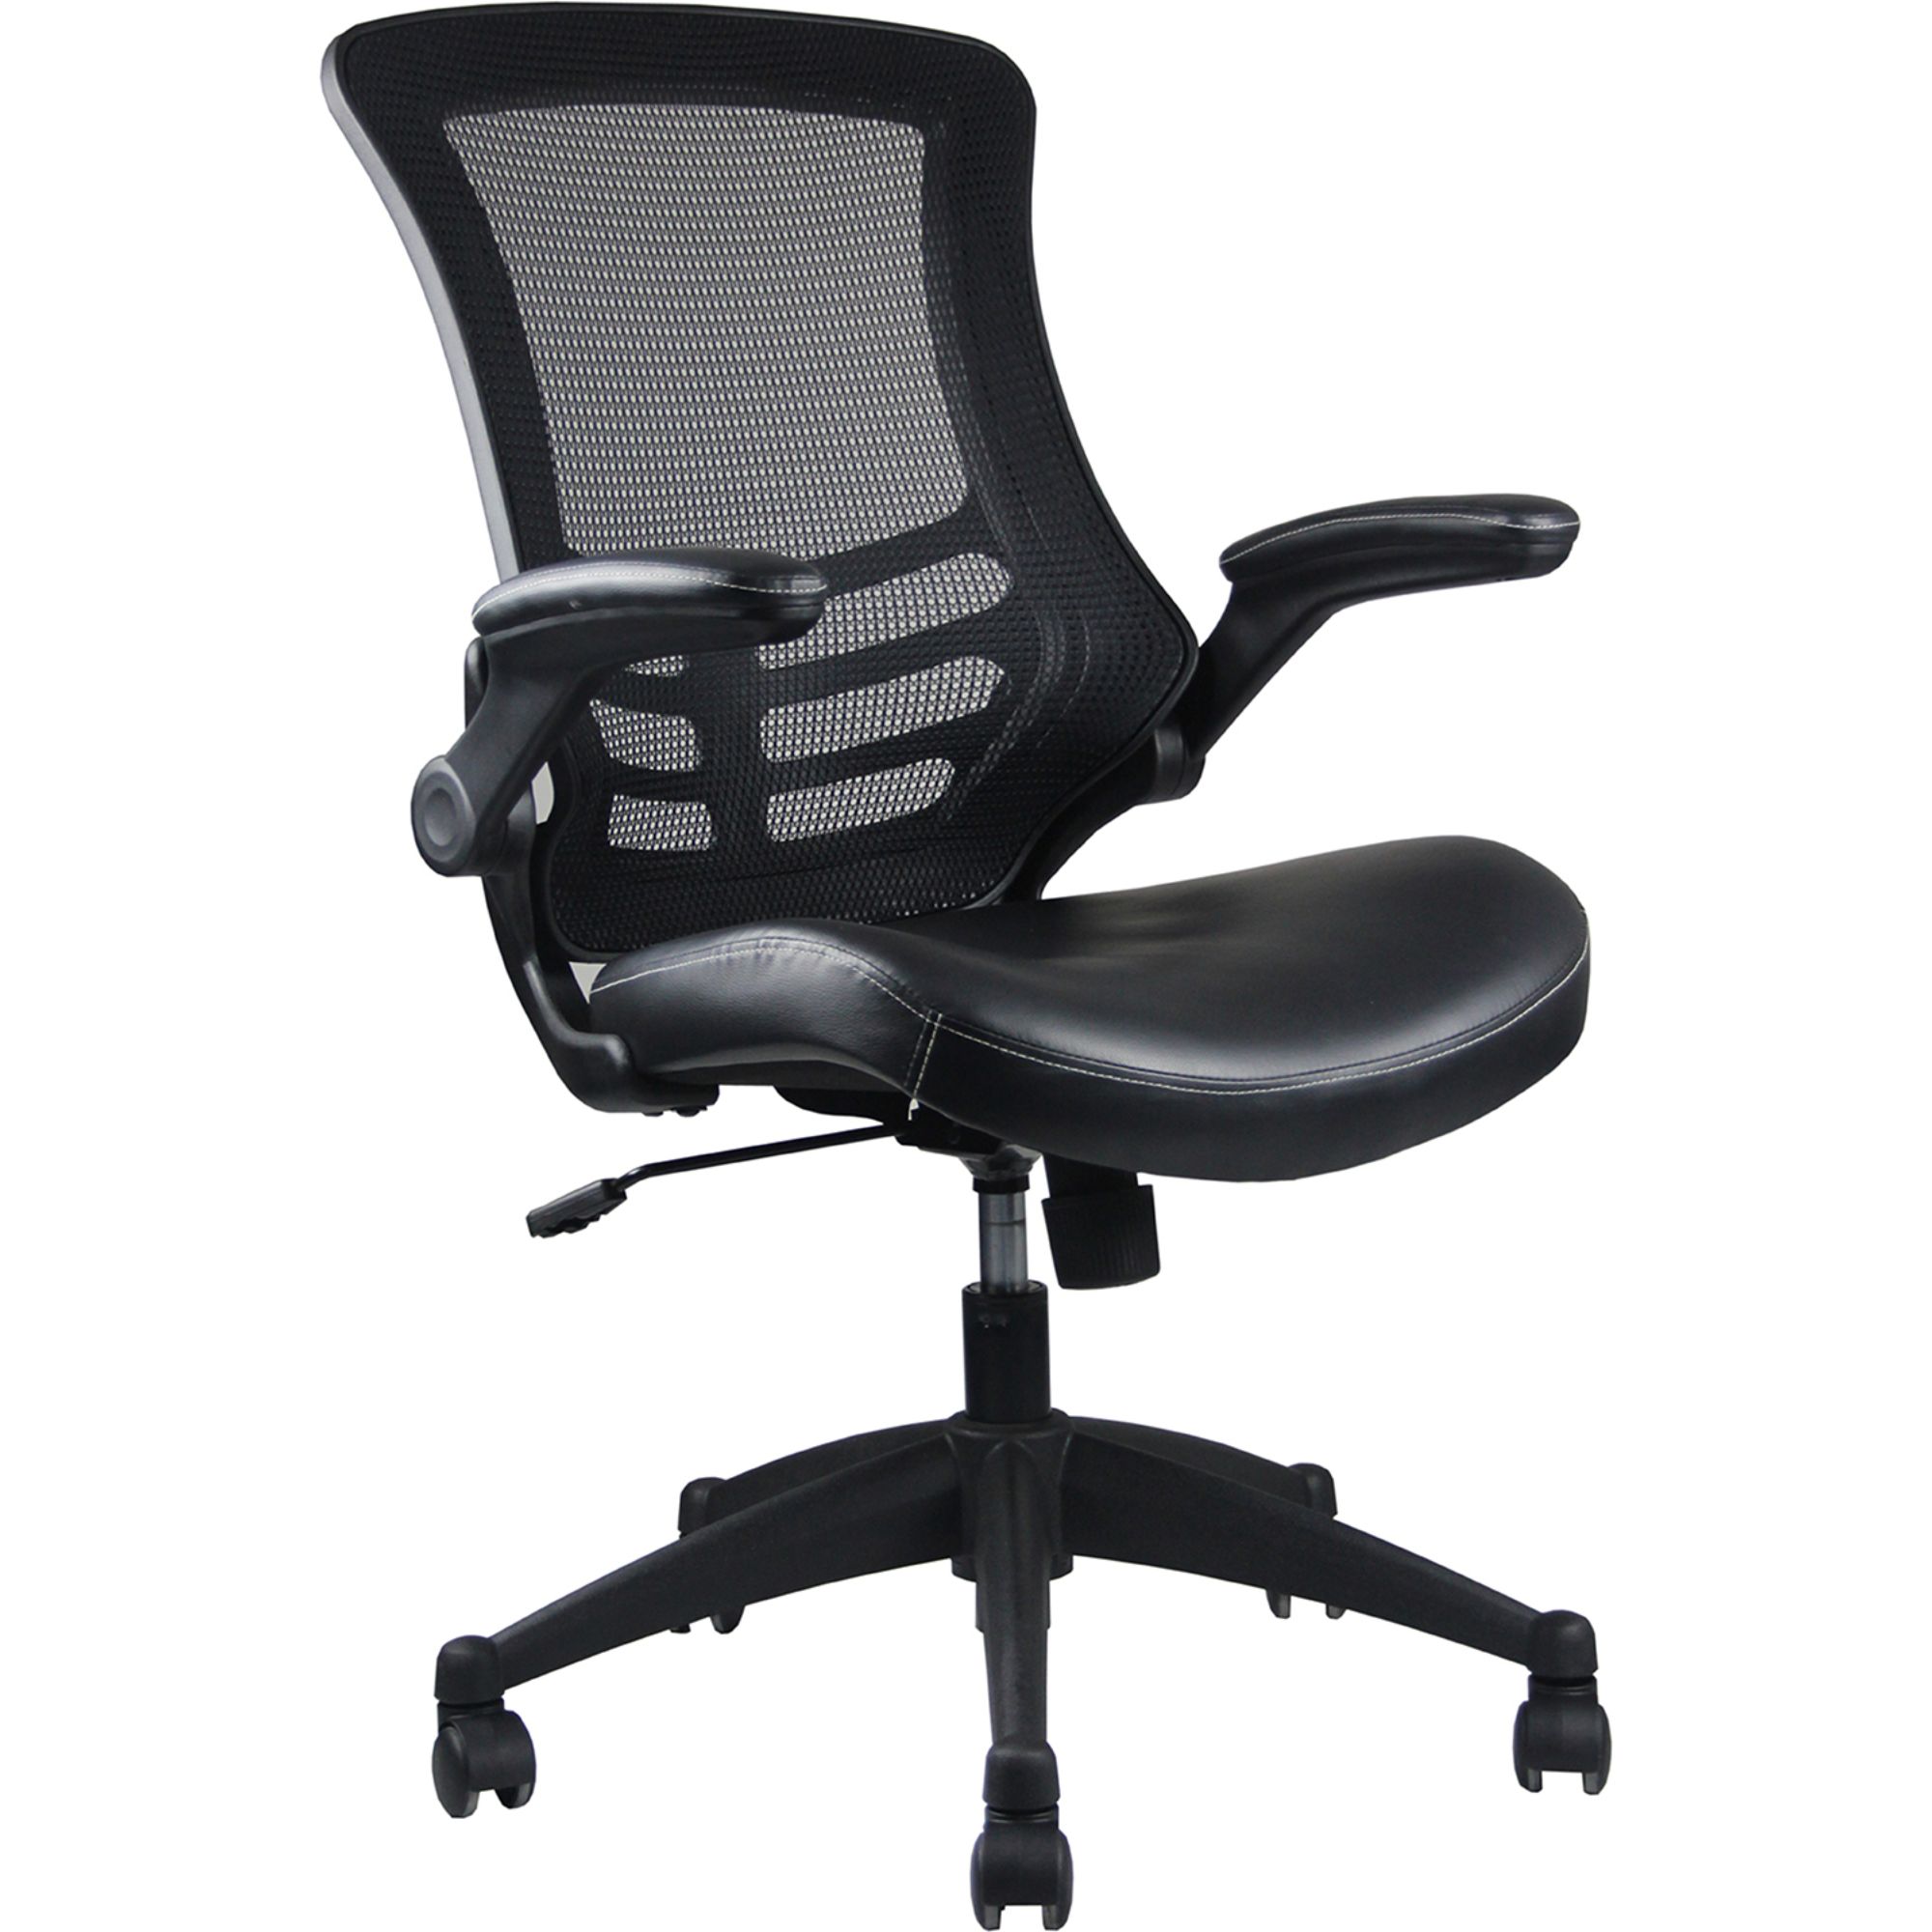 Techni Office Solutions 3' Solid Black Stylish Mid-Back Mesh Office Chair with Adjustable Arms